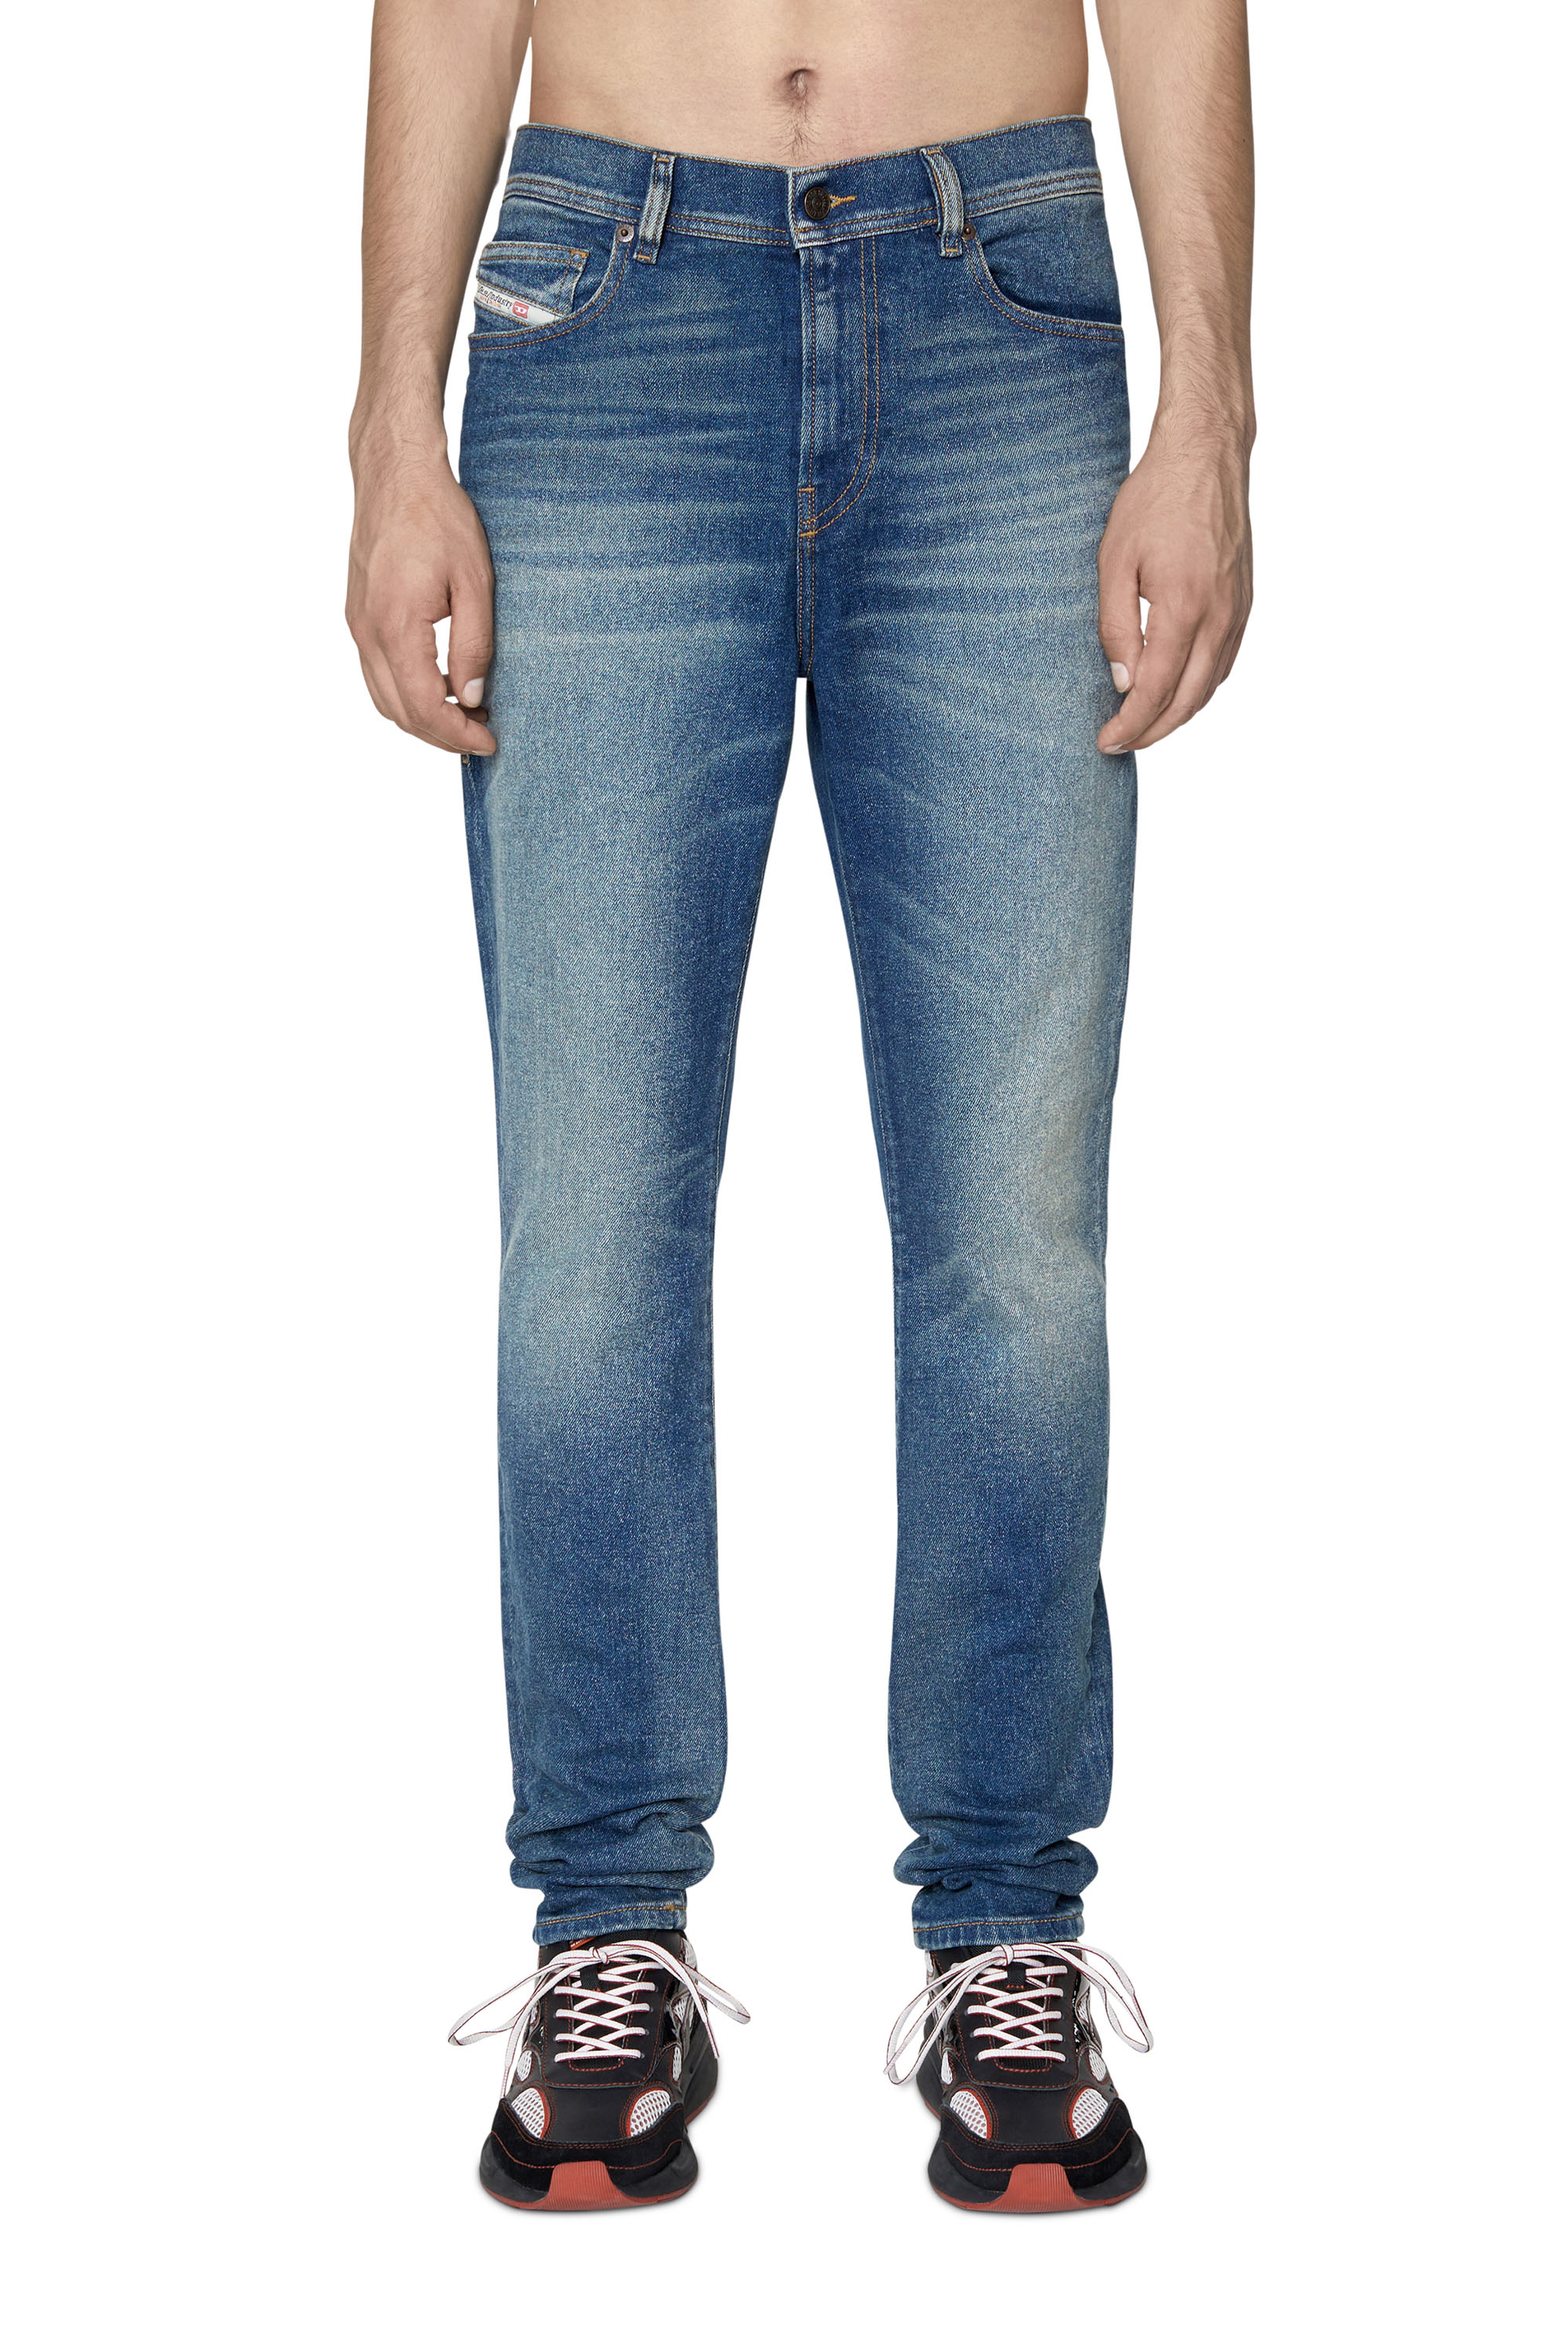 Men's Sale Jeans: Up to 50% Off Slim, Skinny Bootcut Jeans |